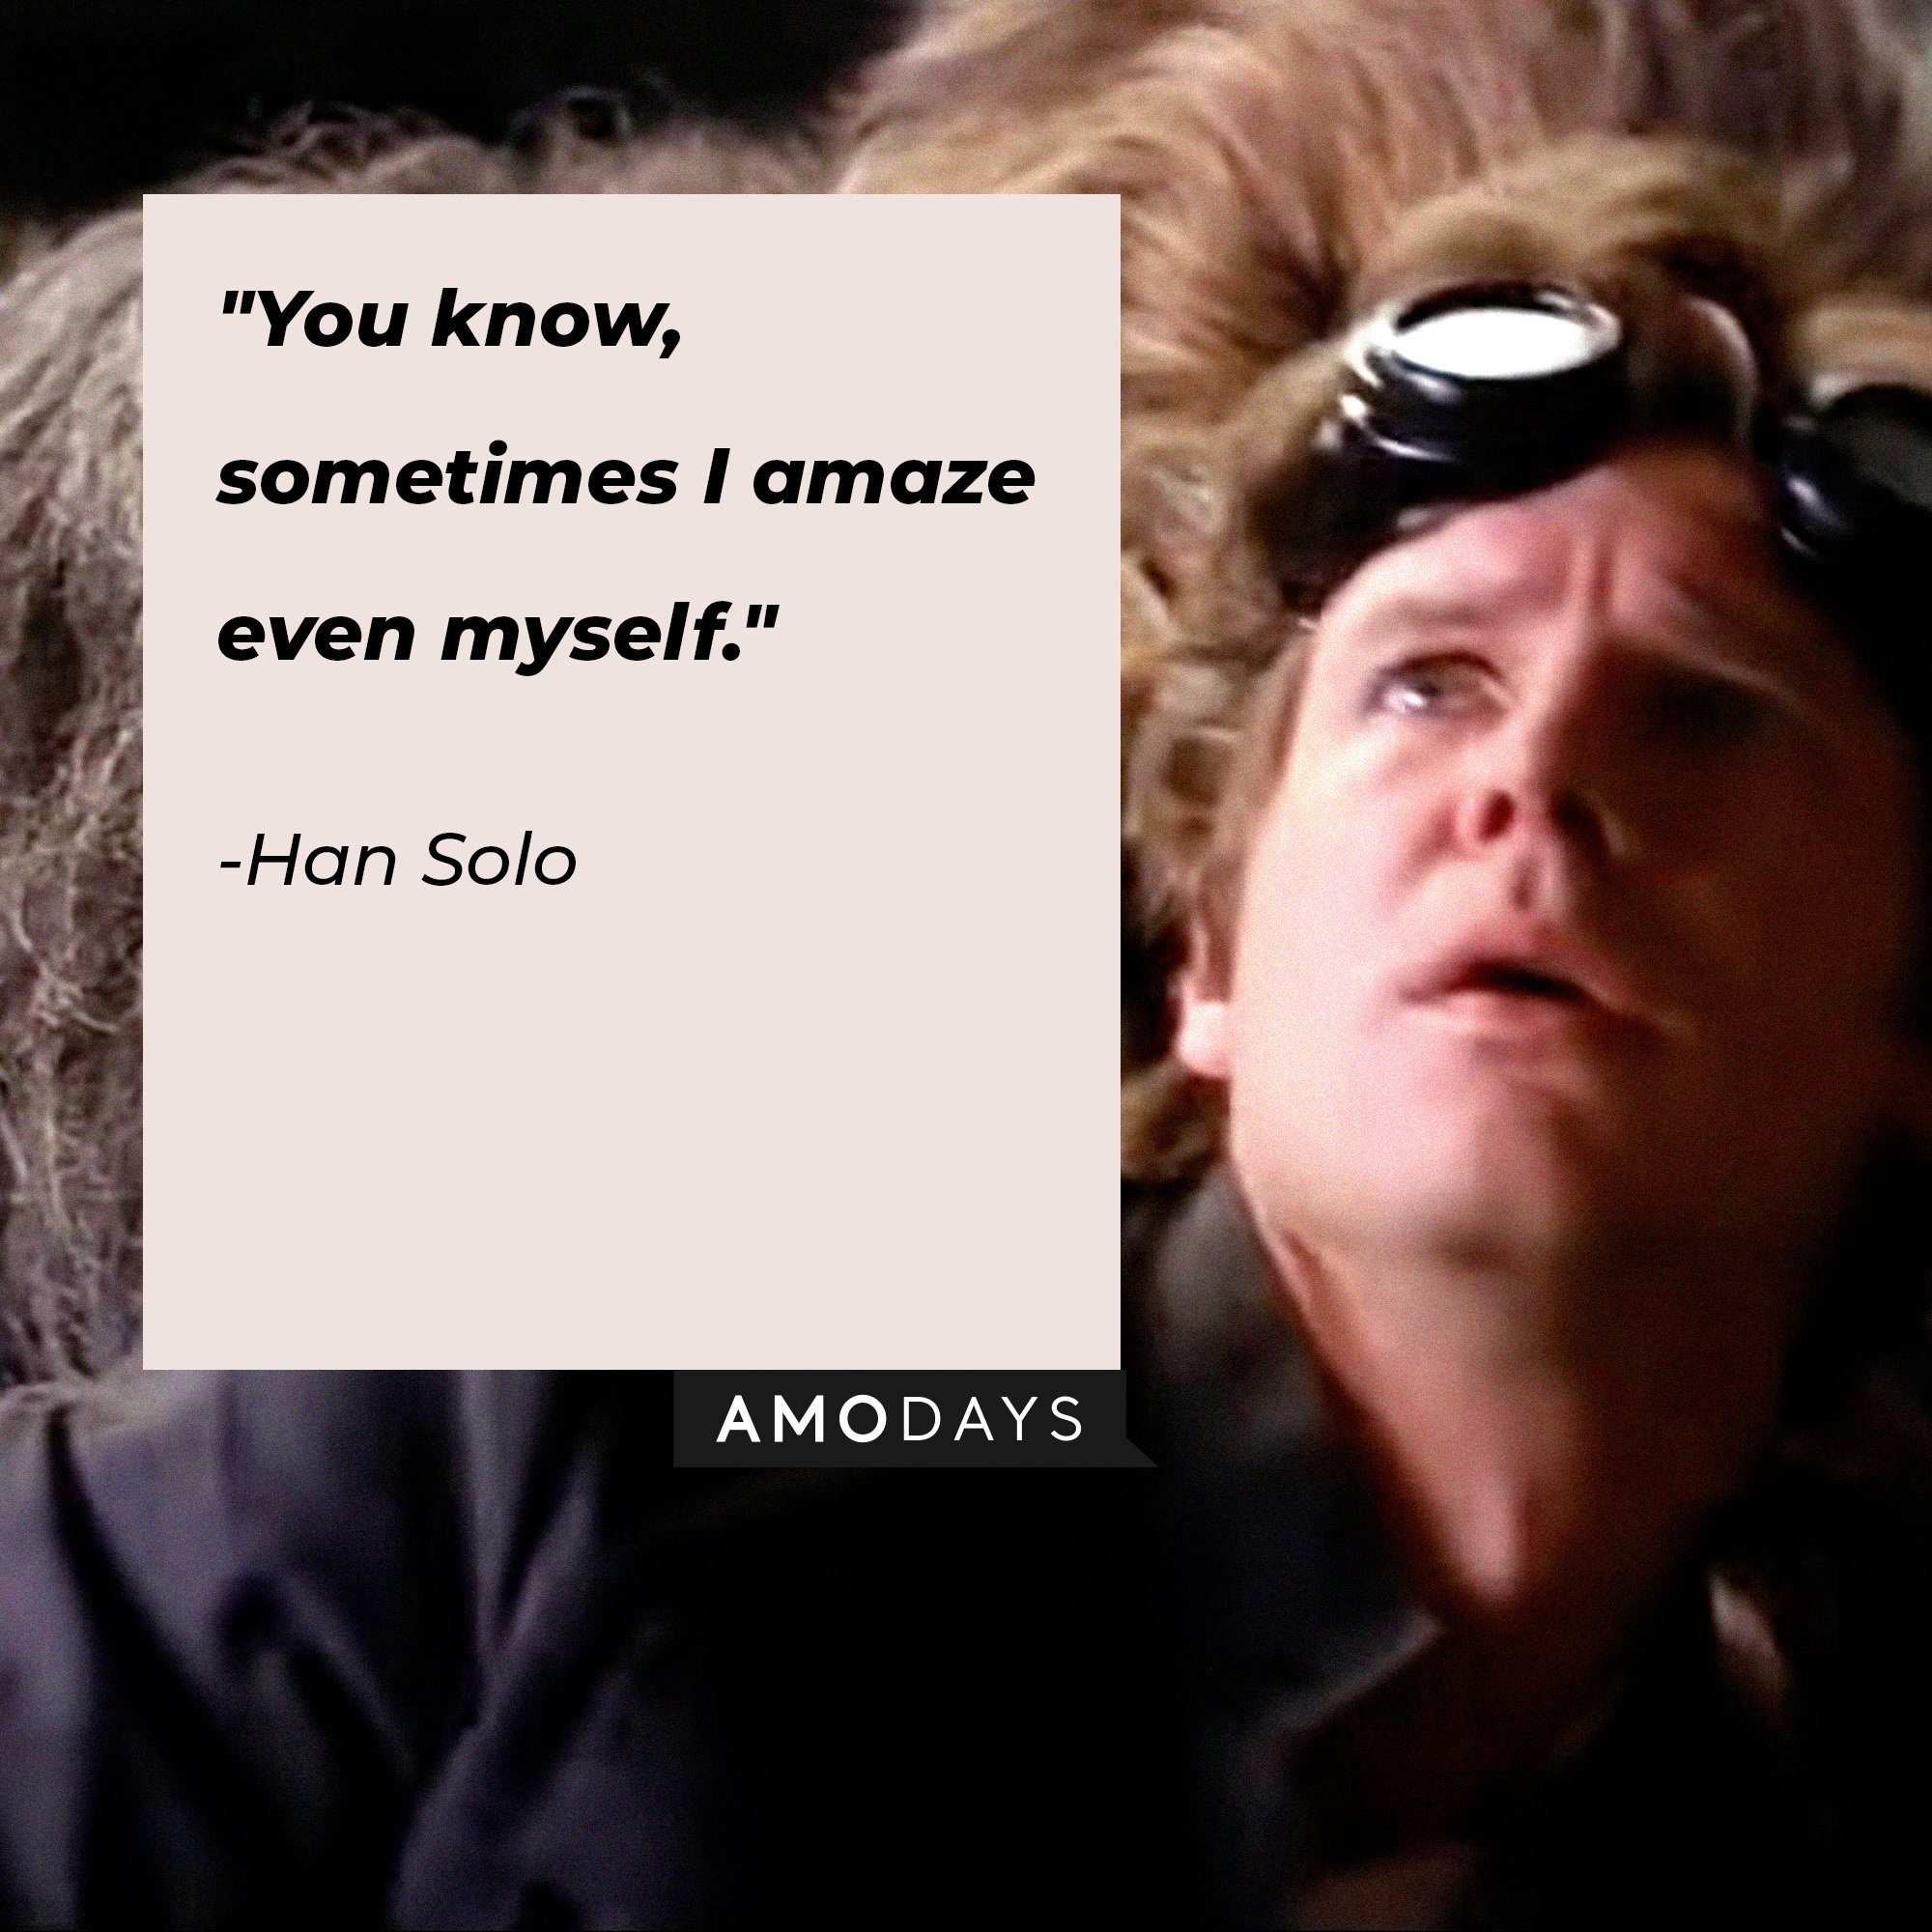 Han Solo’s quote: "You know, sometimes I amaze even myself.” | Image: AmoDays